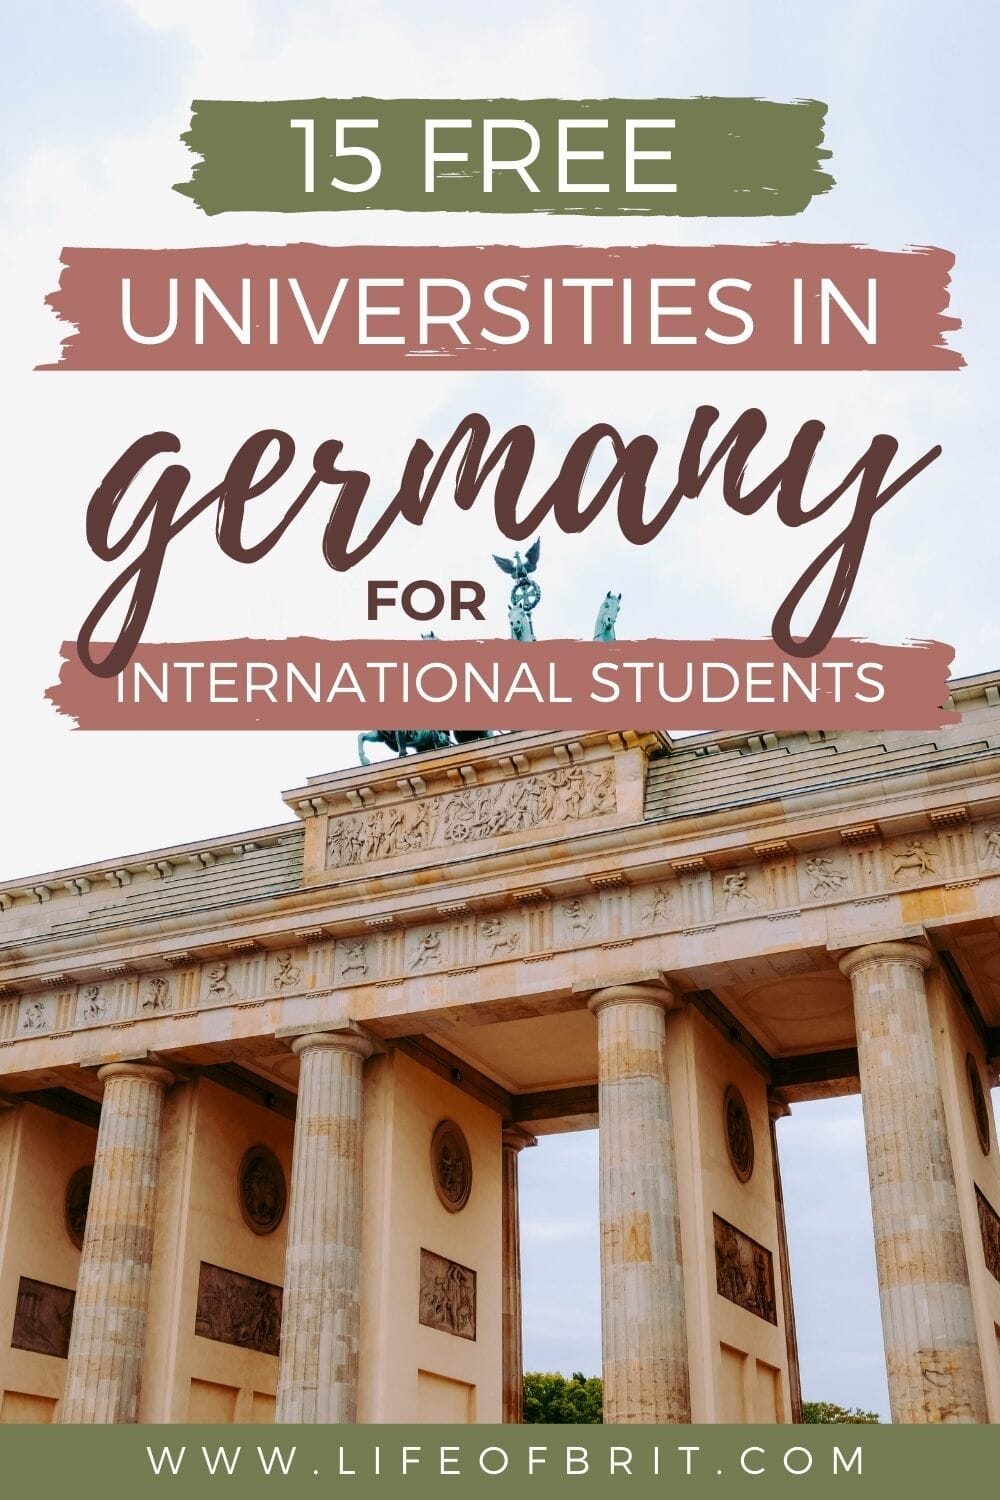 Free Universities in Germany for International Students